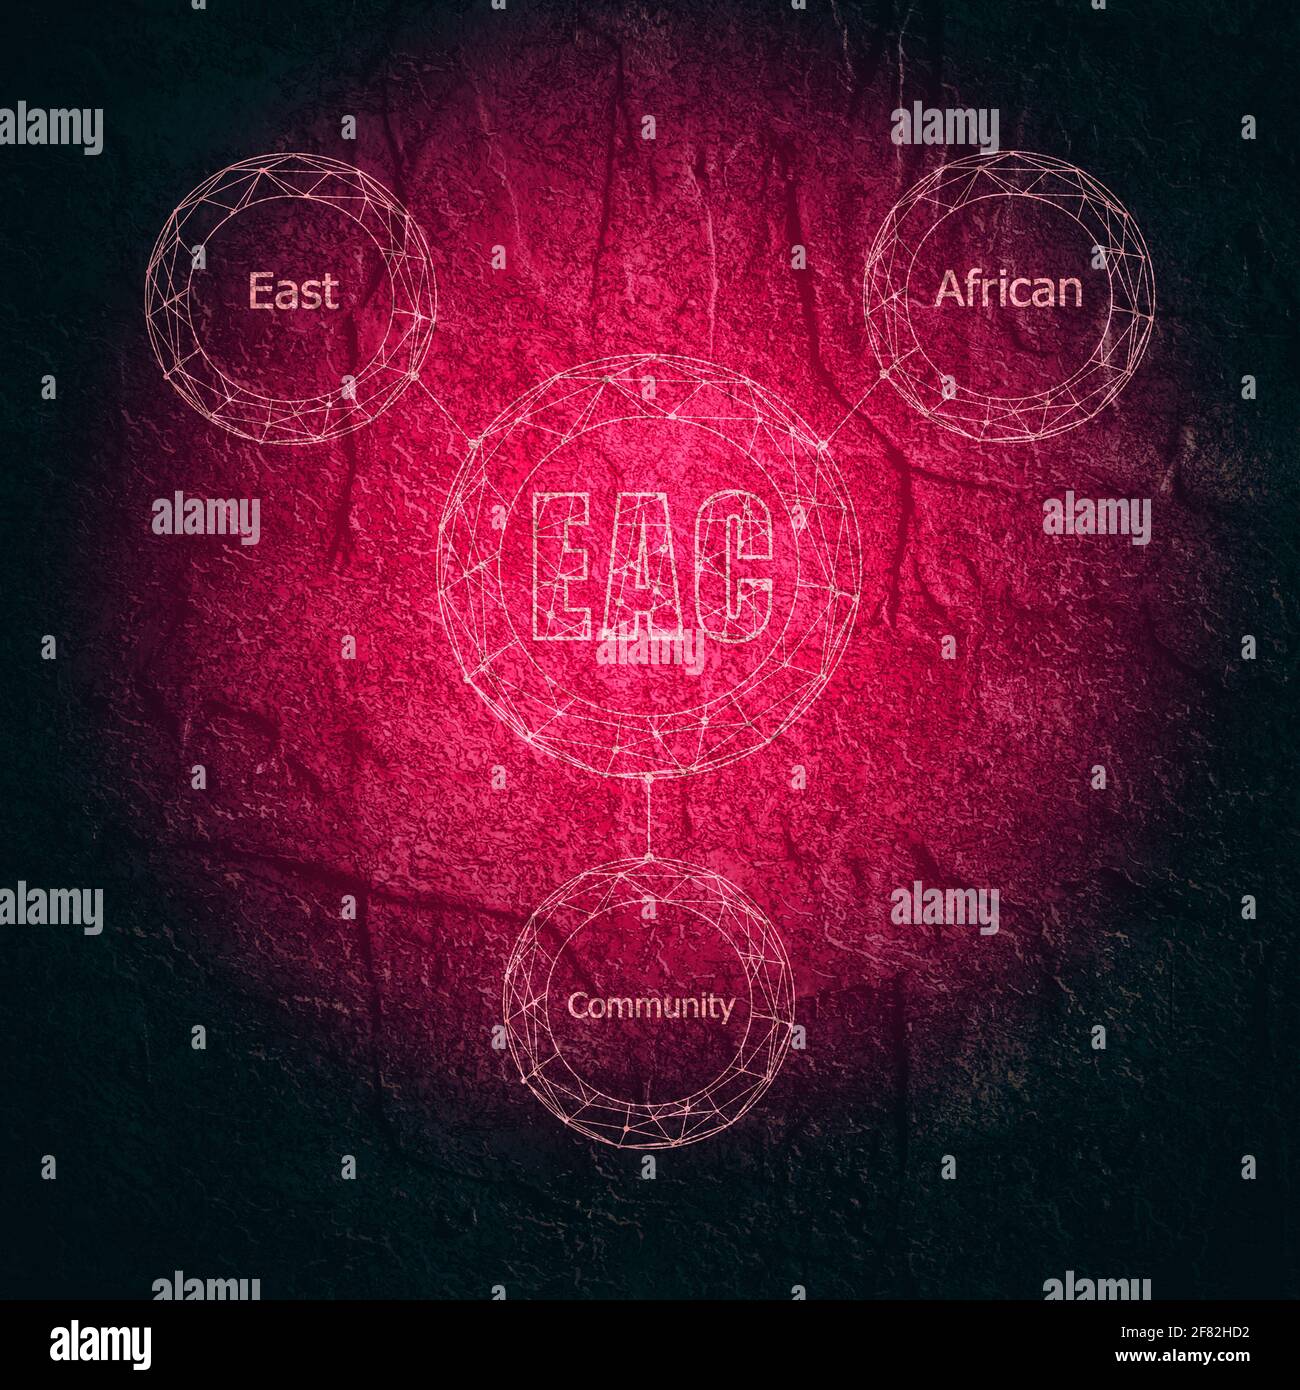 Acronym EAC - East African Community. Business conceptual image. Global teamwork. Stock Photo